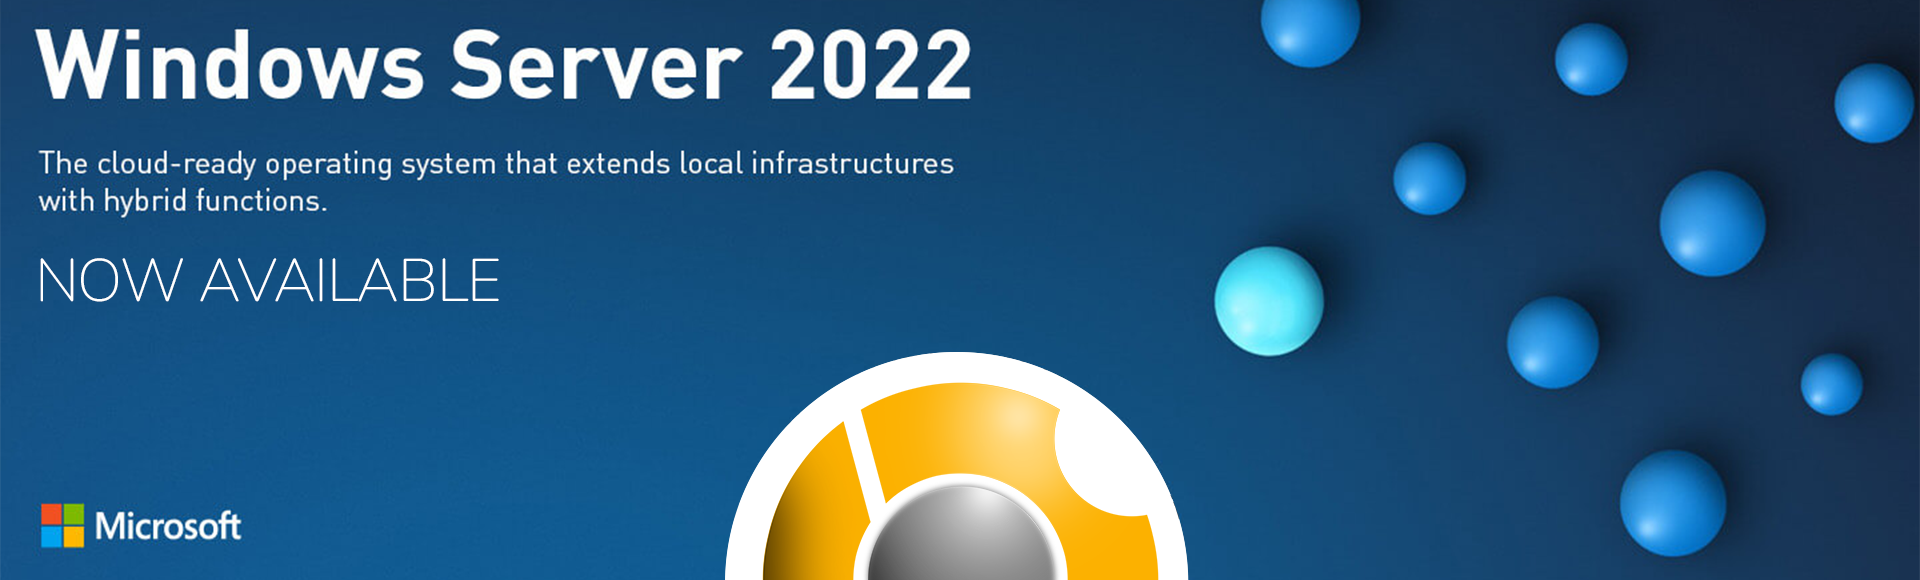 Windows Server 2022 - Now Available